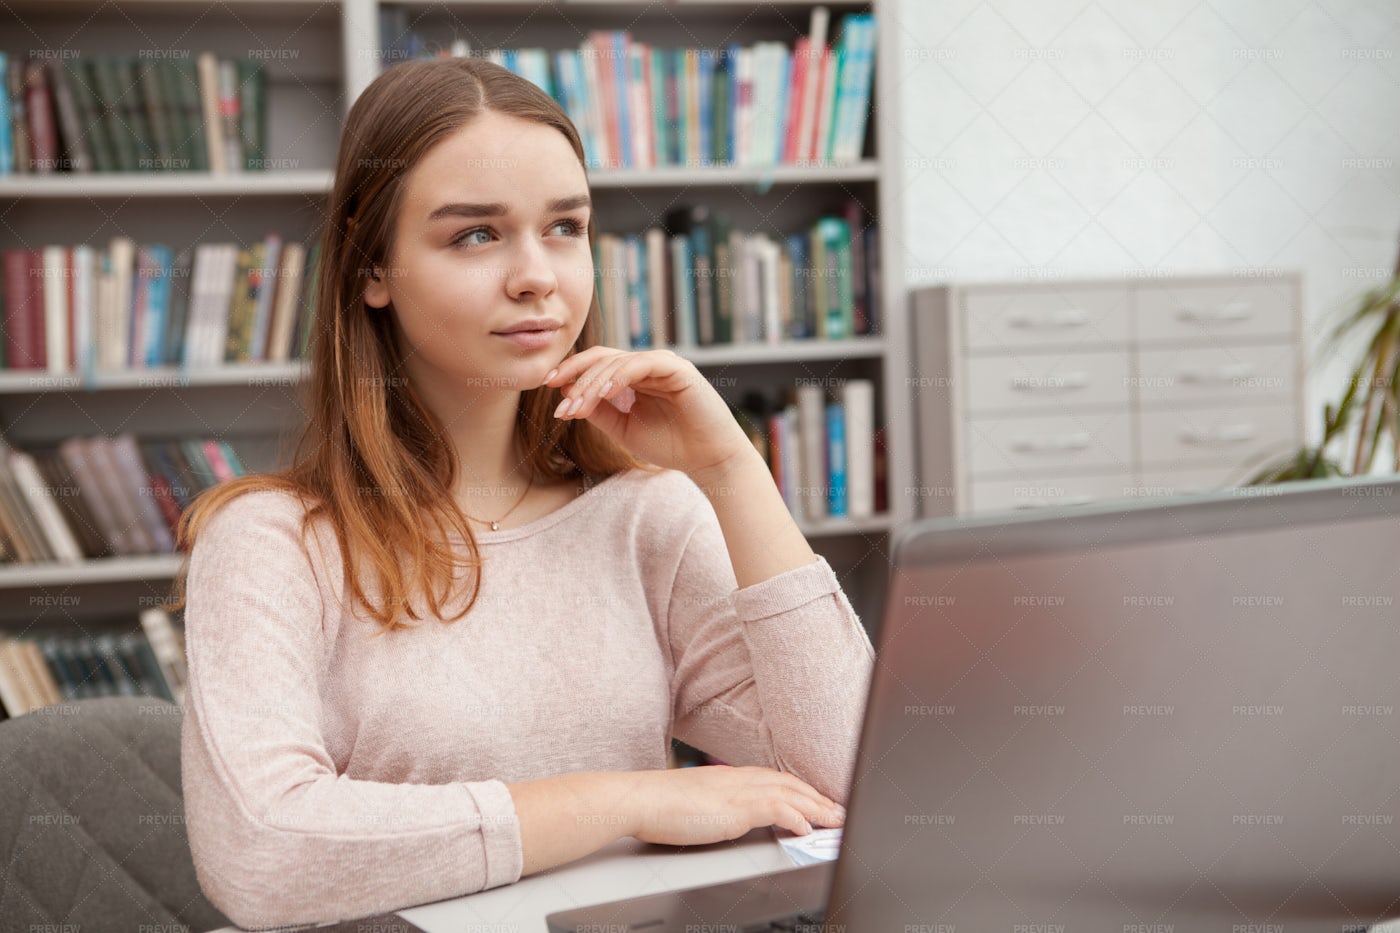 Studying At A Library: Stock Photos